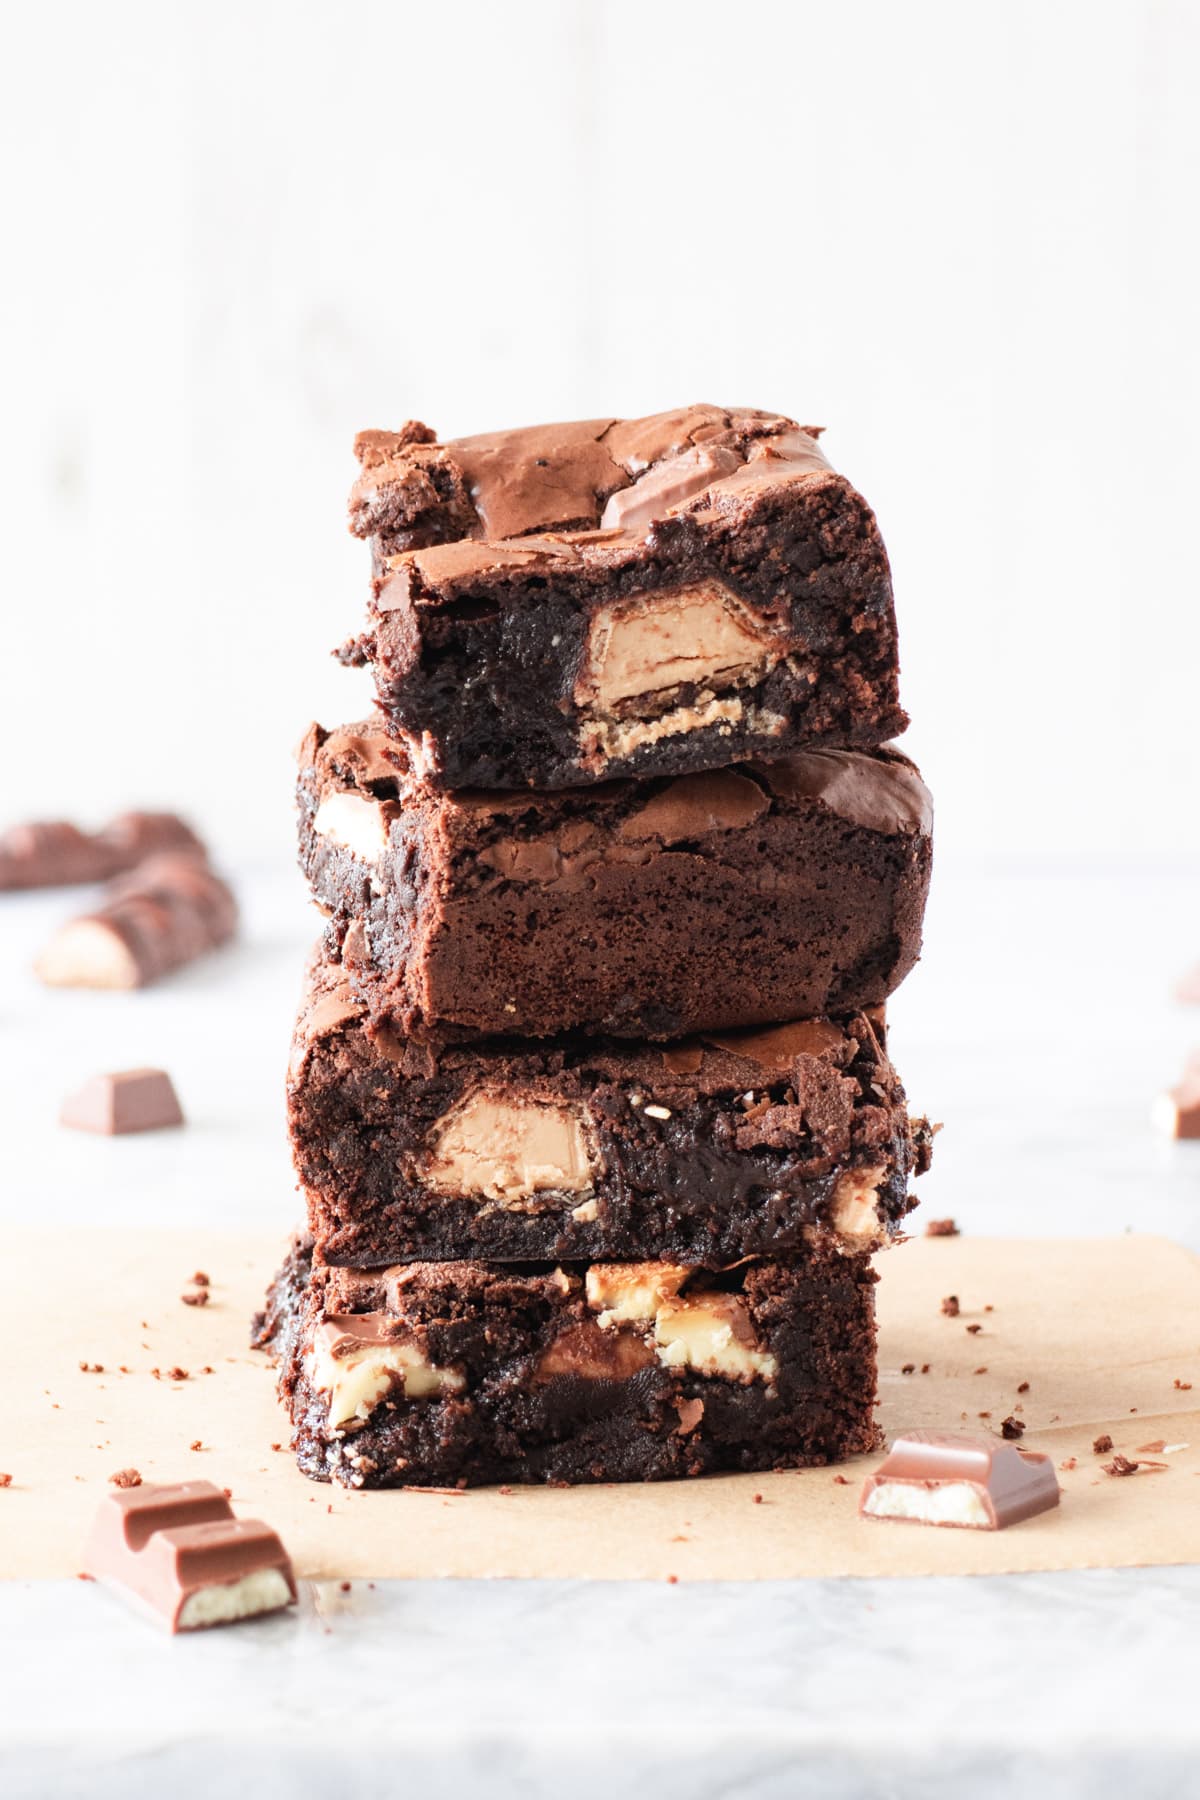 Stack of four chocolate brownies with hazelnut cream filling inside